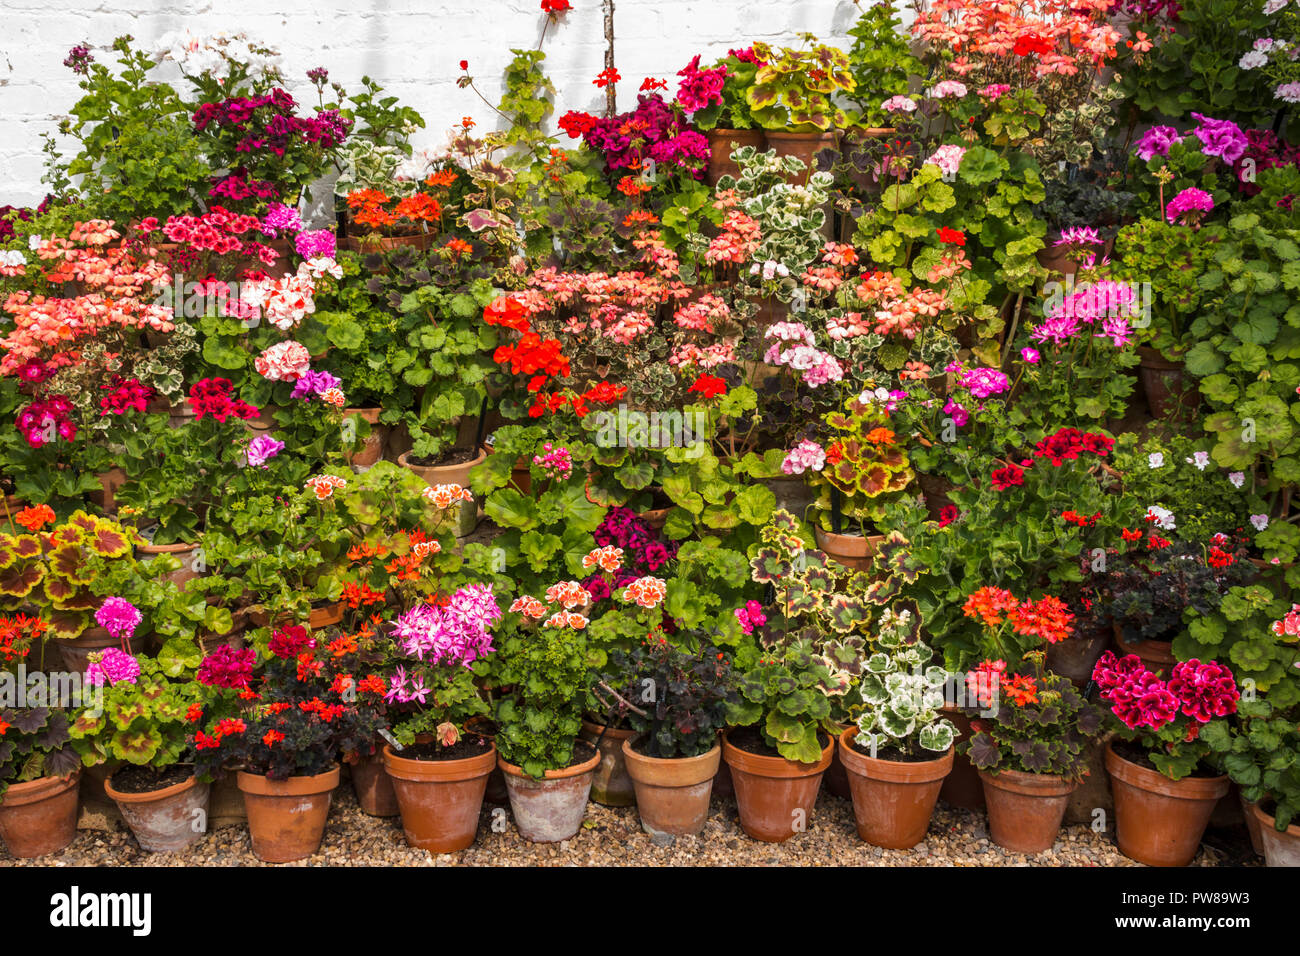 Tiered display of pelargoniums / geraniums in terracotta pots in a greenhouse at Dyffryn Gardens, South Wales, UK Stock Photo